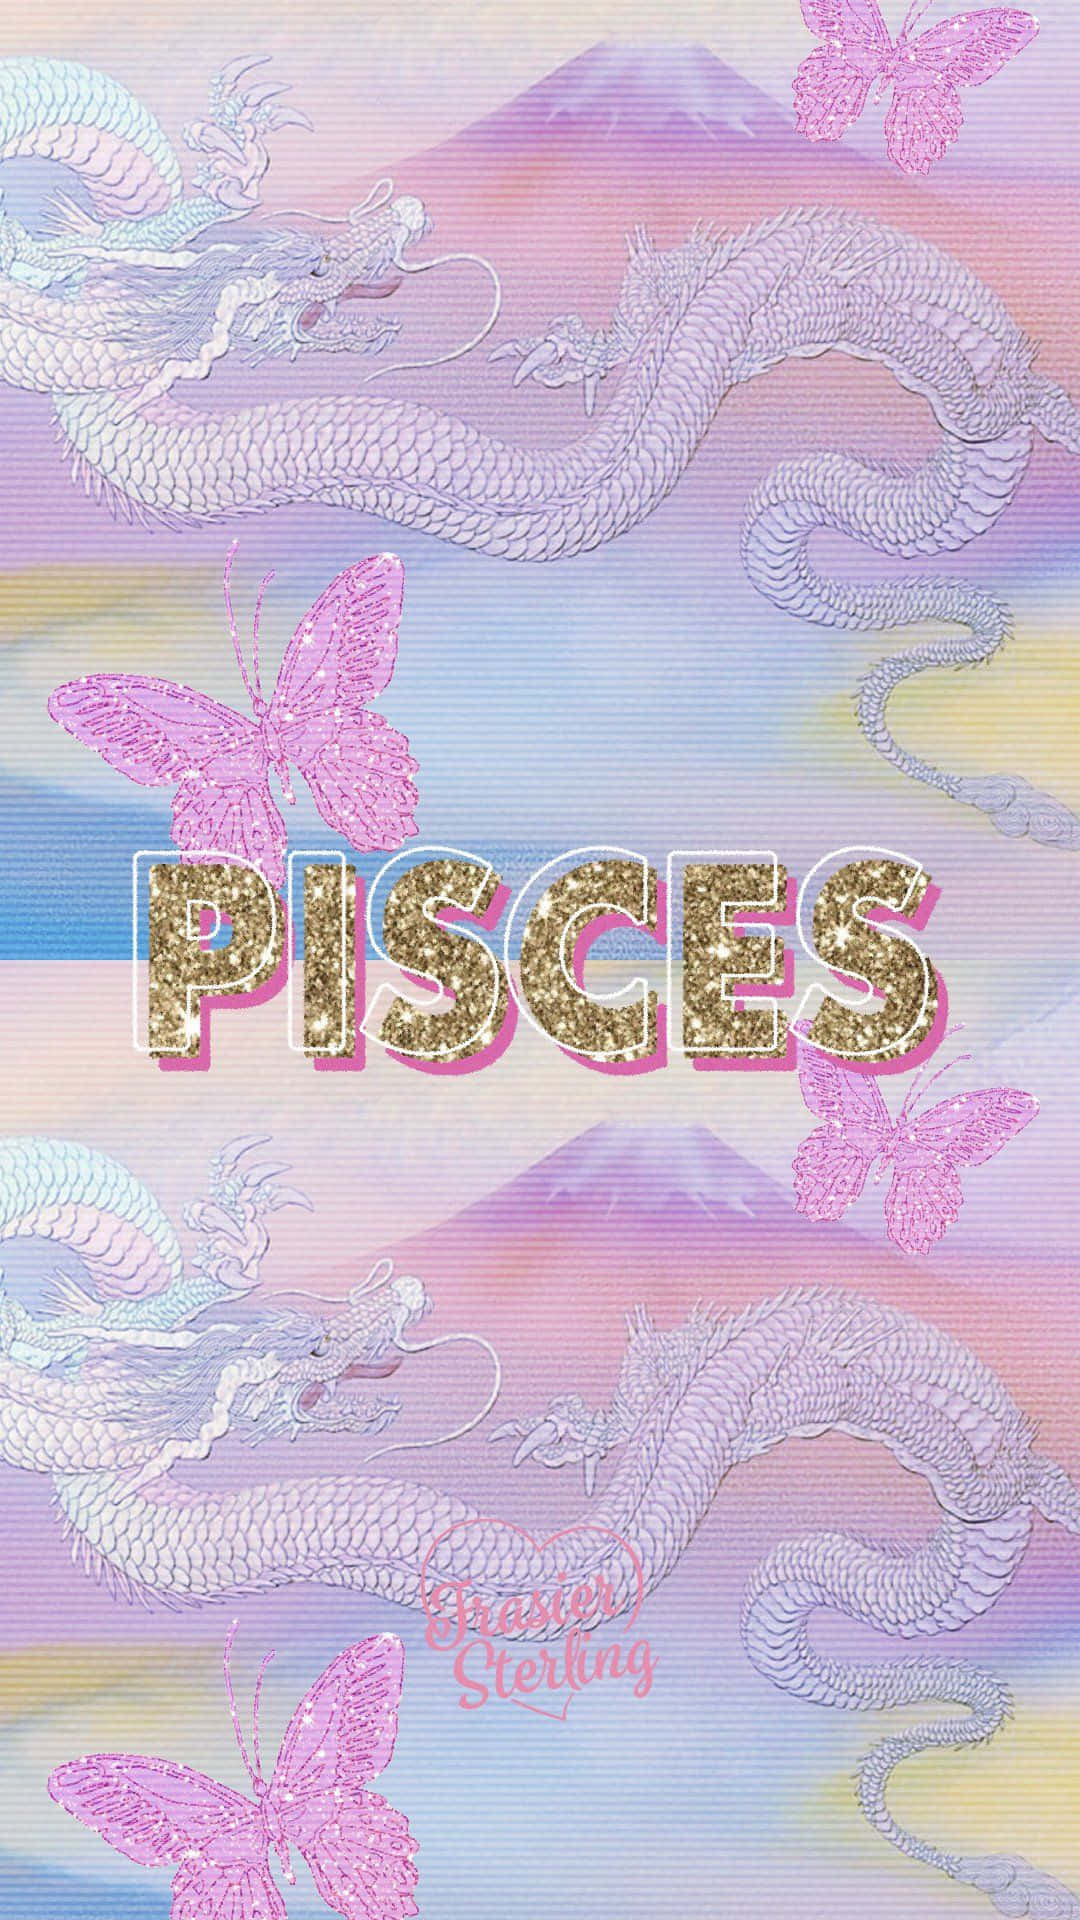 Dreaming of the Future Under the Pisces Sign